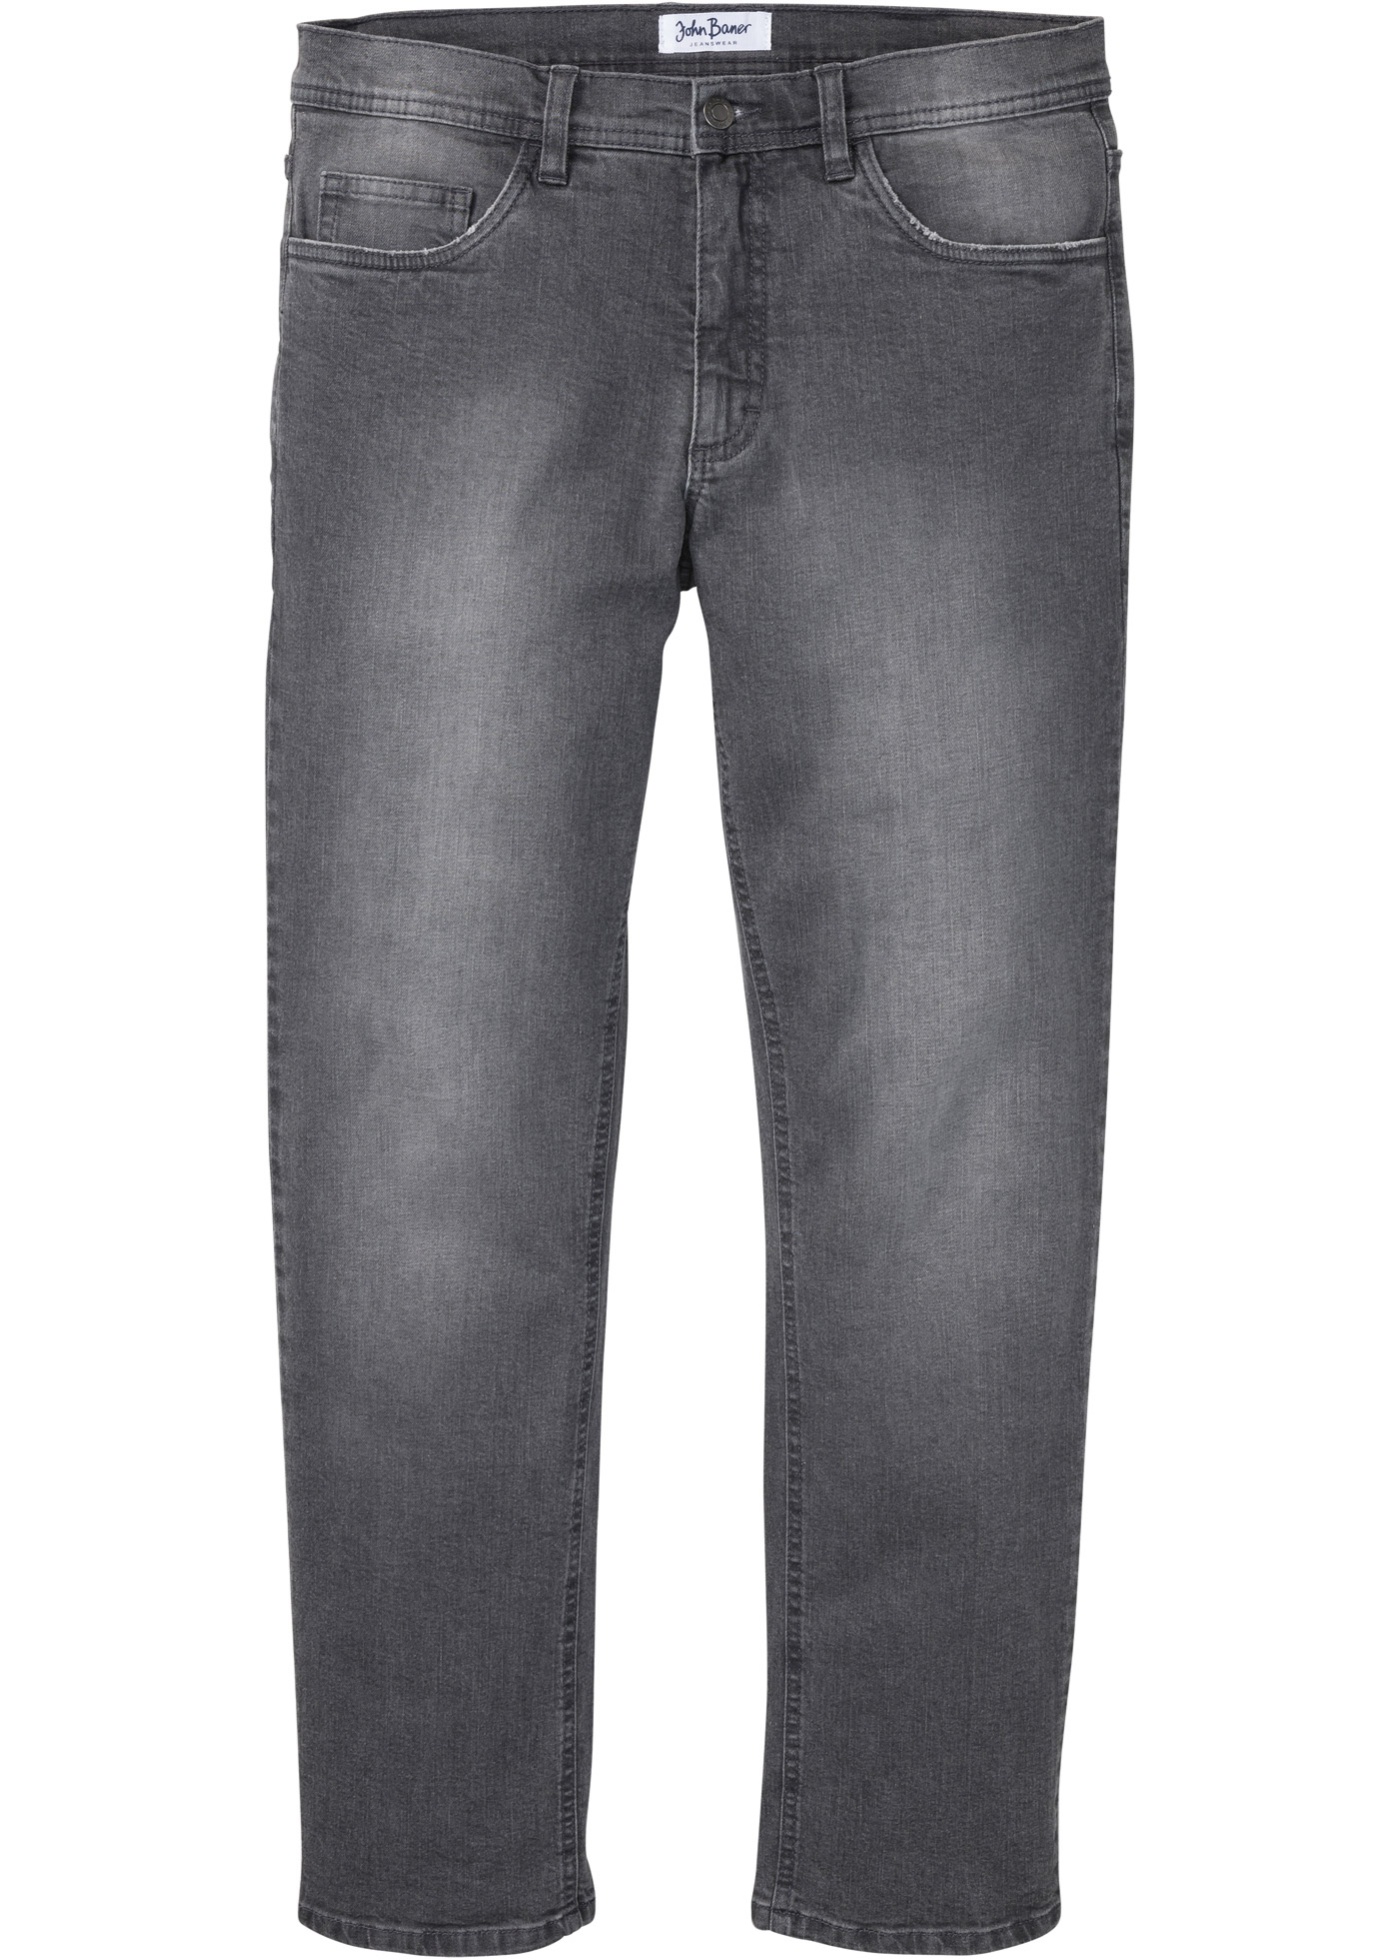 jean extensible regular fit coupe confort, straight